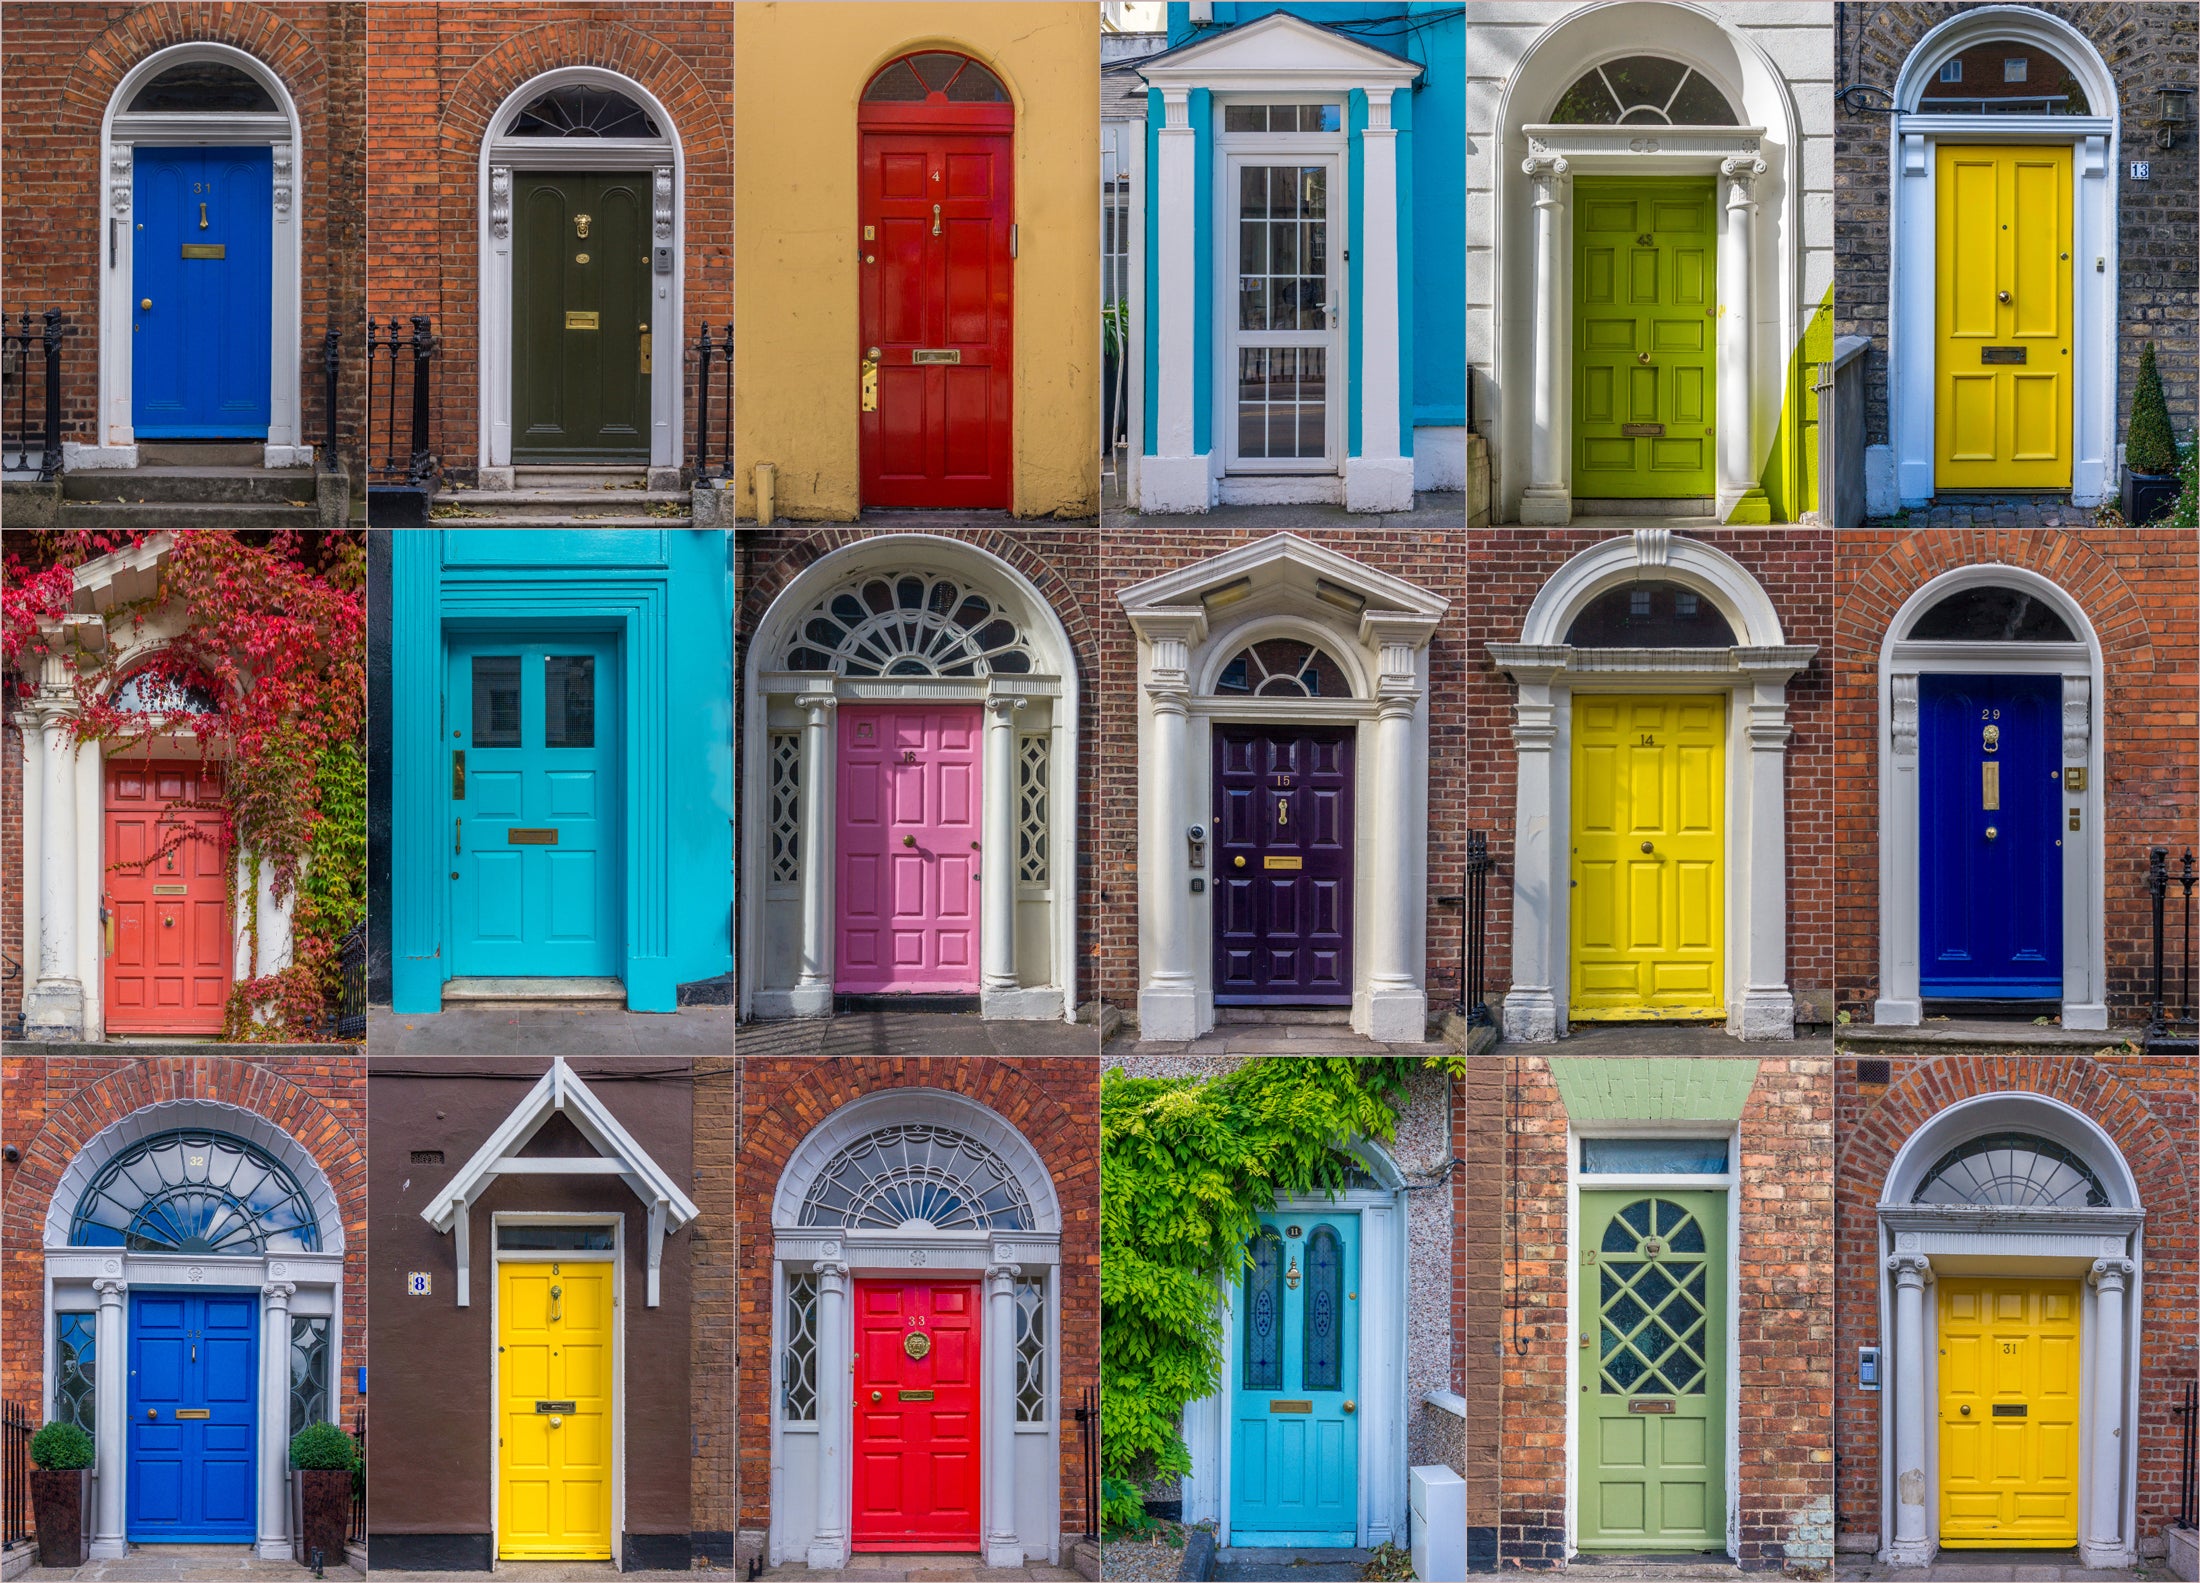 A grid of exterior doors painted in different colors on different houses.